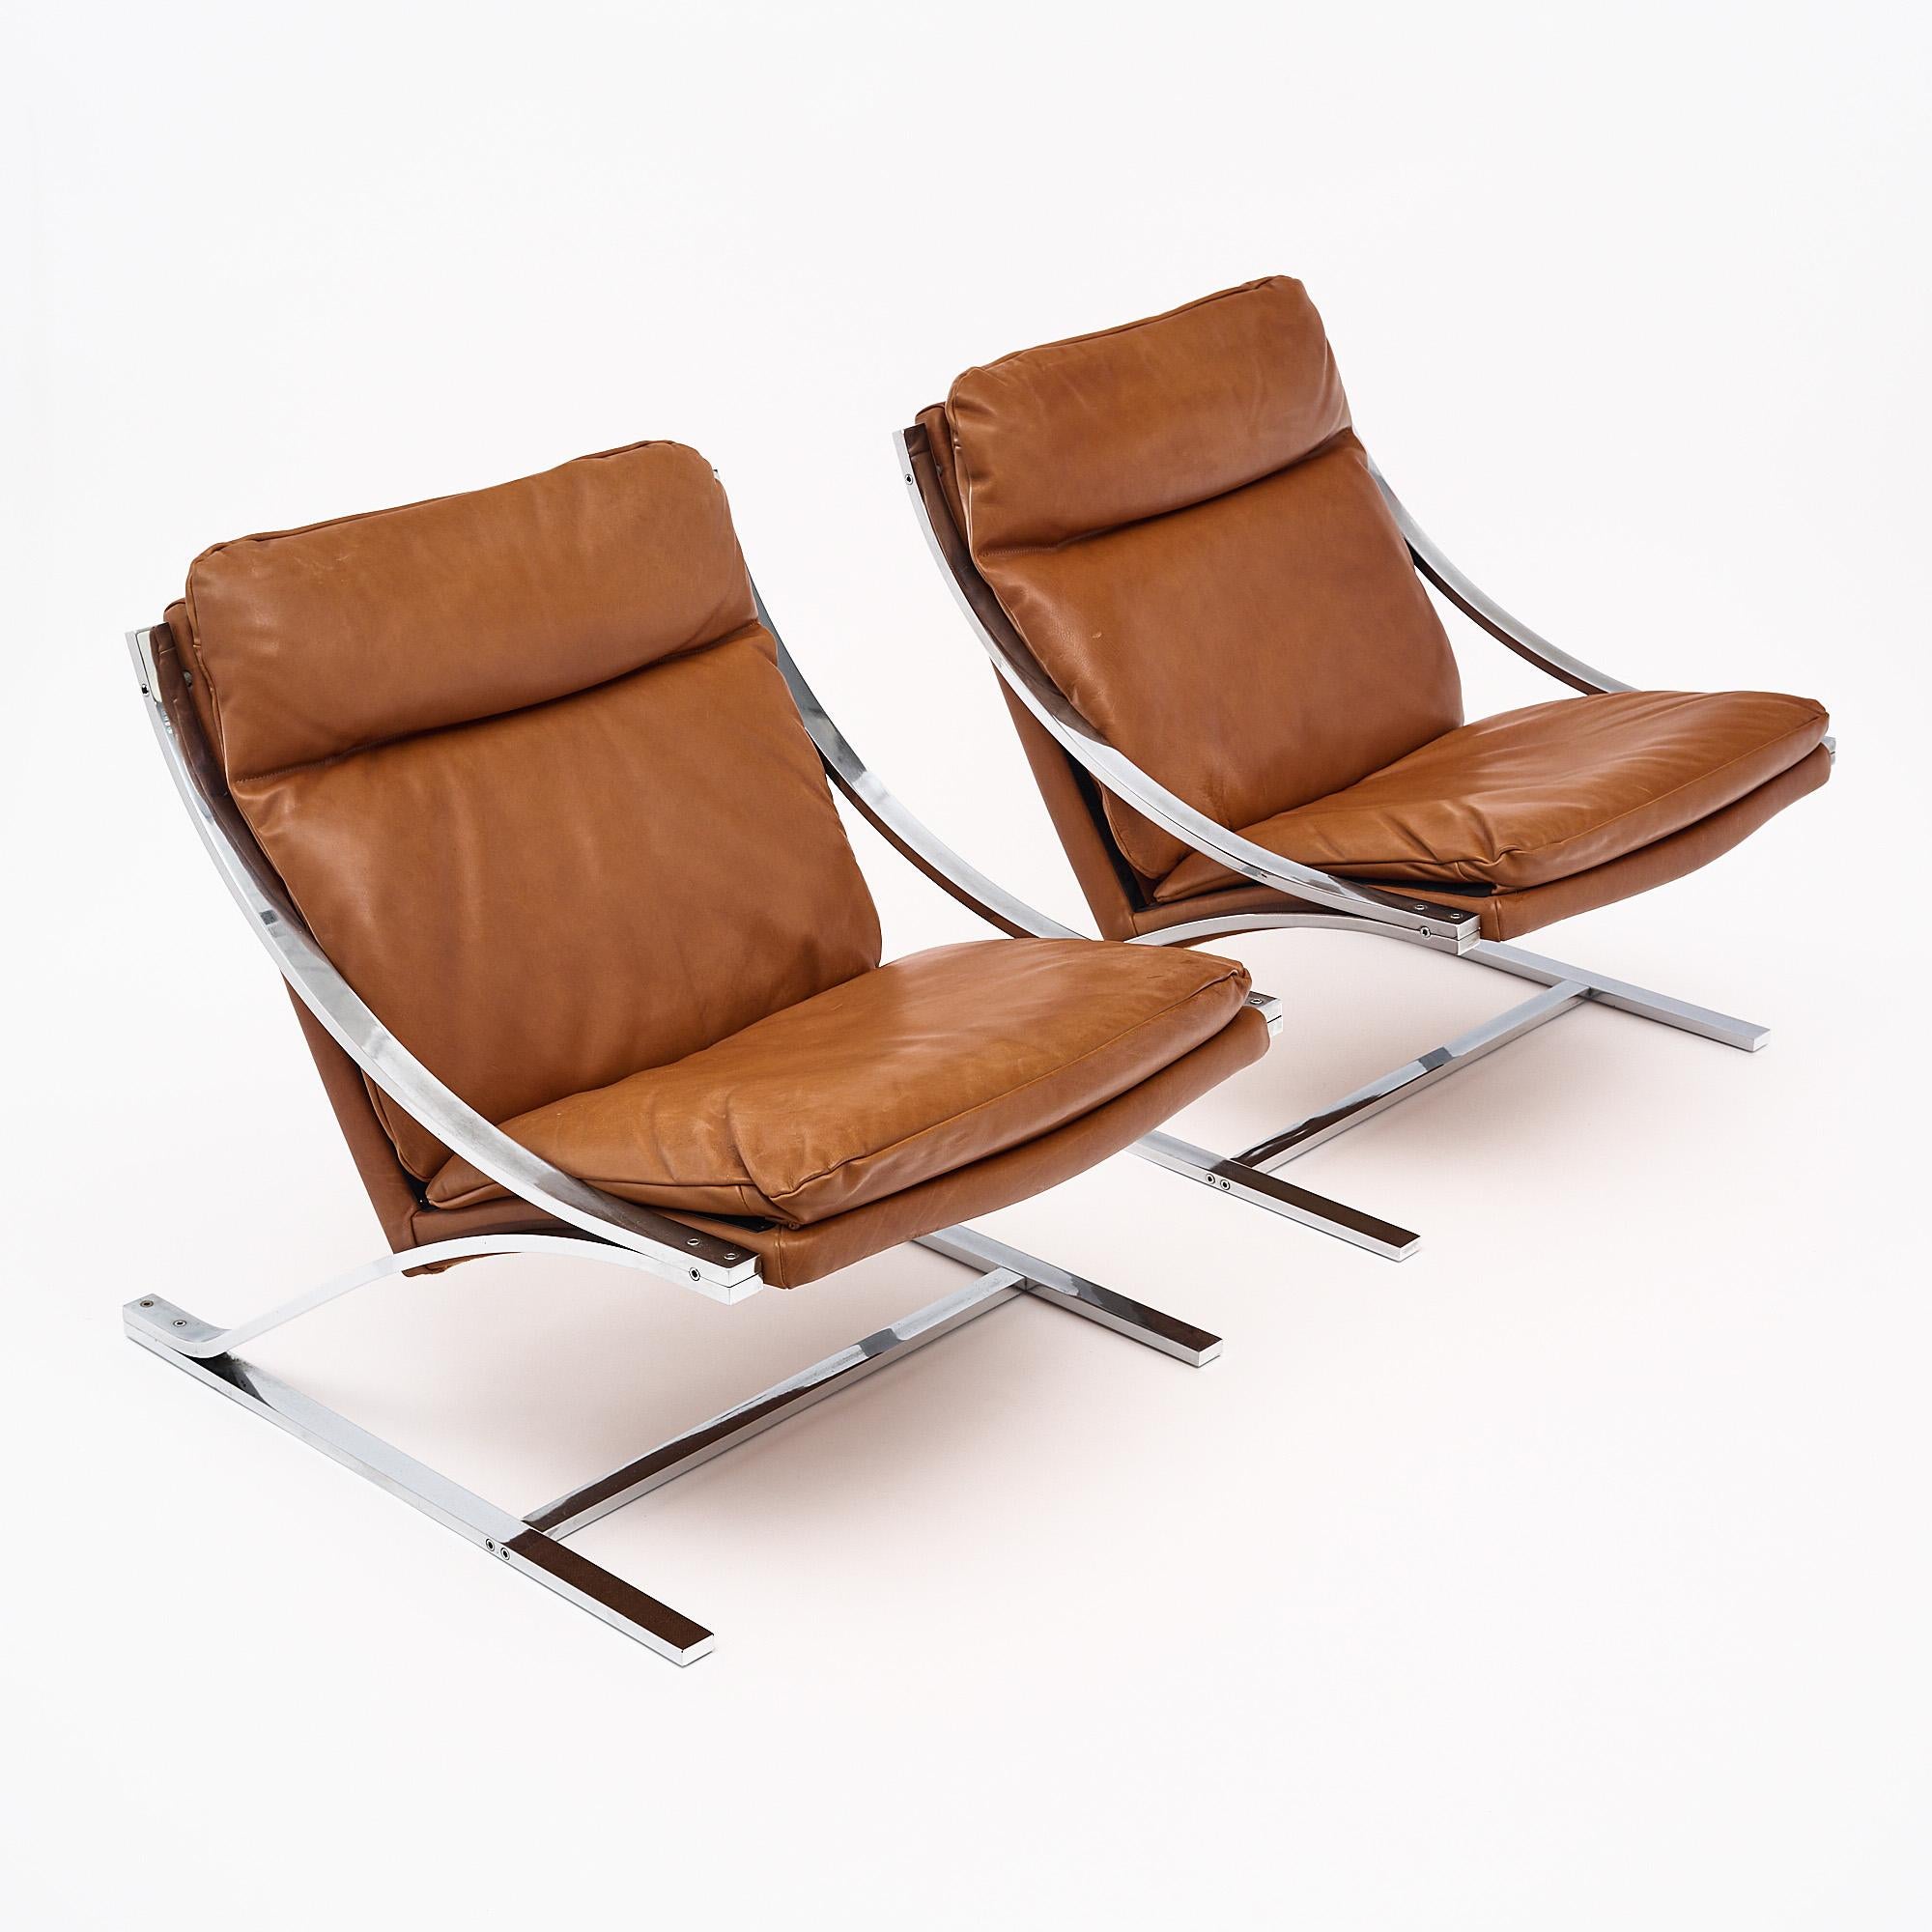 Pair of lounge chairs by Paul Tuttle for Strässle International featuring soft cognac colored leather upholstery and strong and dynamic chrome structures. Each seat sits back to create a comfortable angle and the quality of the material is striking.